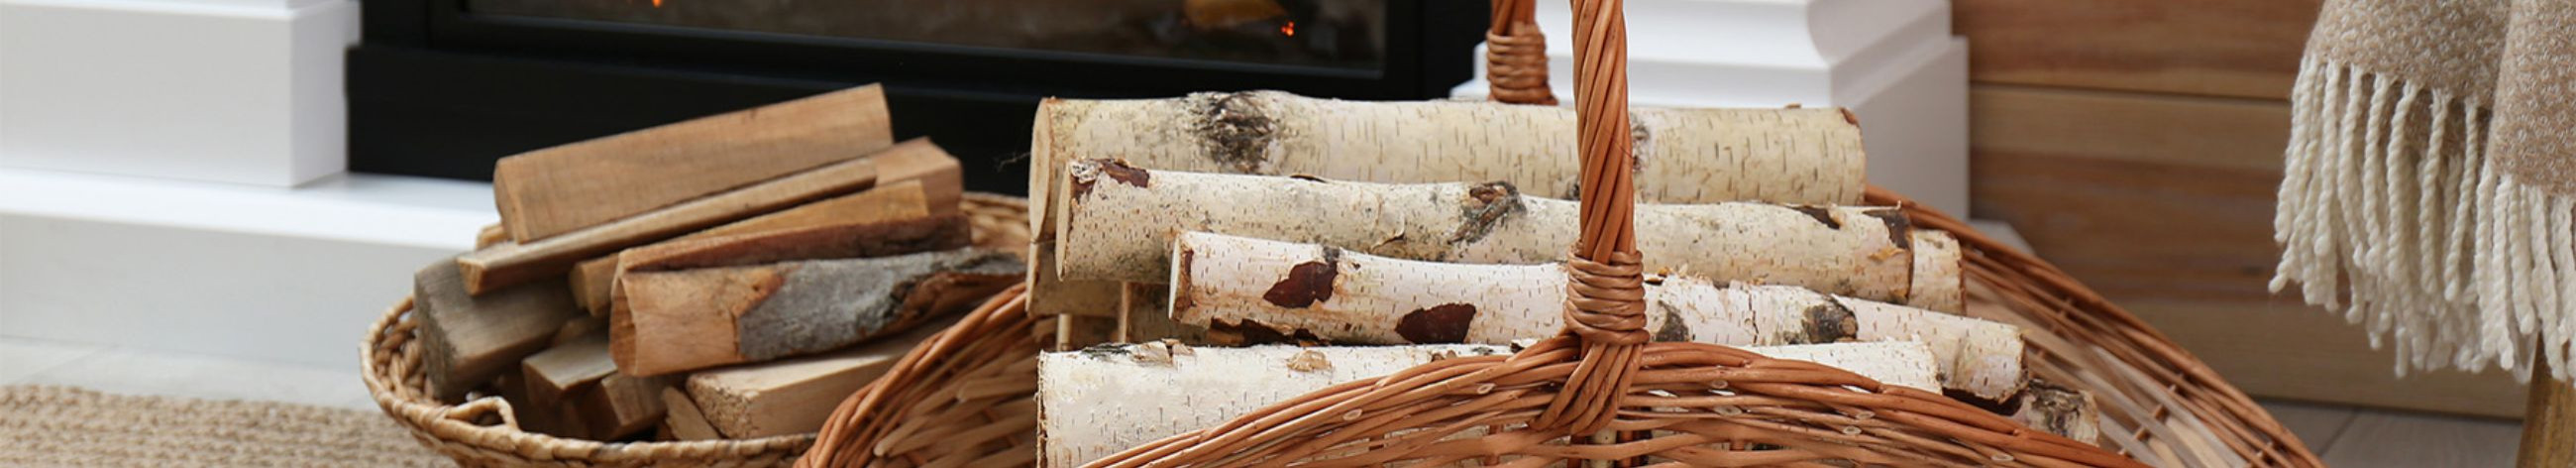 Wood and Paper Industry, buying-in and selling of wood, heating materials, birch firewood, alder trees, buying and selling wood, wood and paper industry supplier, heating materials provider, birch firewood for sale, alder firewood supplier